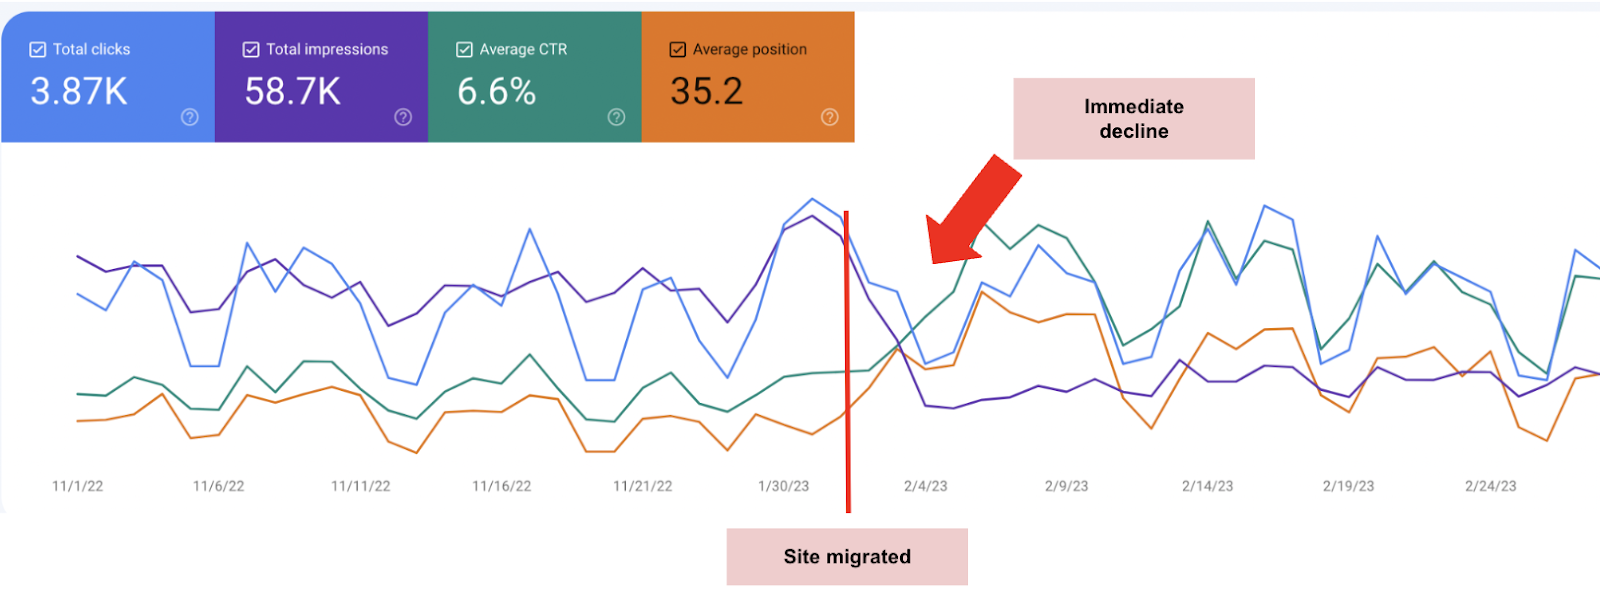 Google Search Console graph of a website's total clicks, impressions, average click-through rate, and average position declining following a website migration